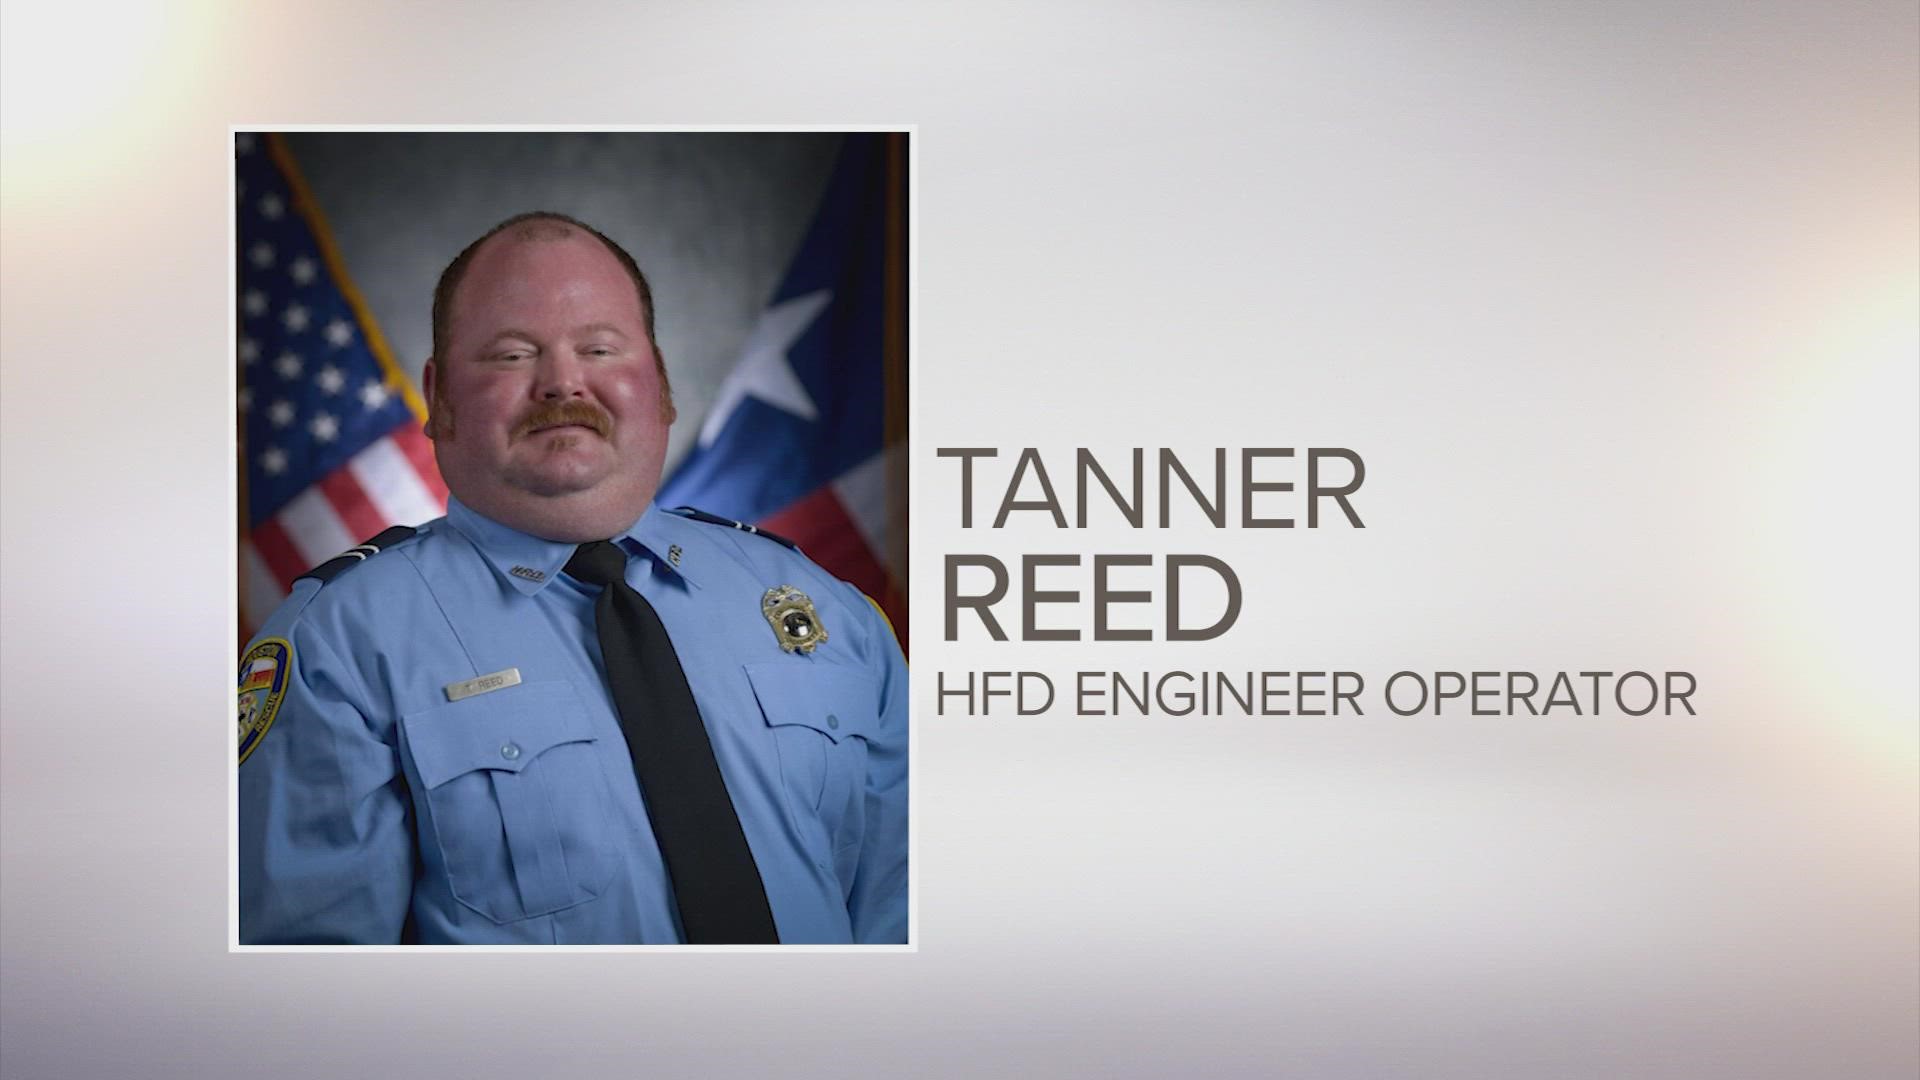 HFD Engineer Operator Tanner G. Reed, 39, died Friday afternoon after spending a week in the ICU.